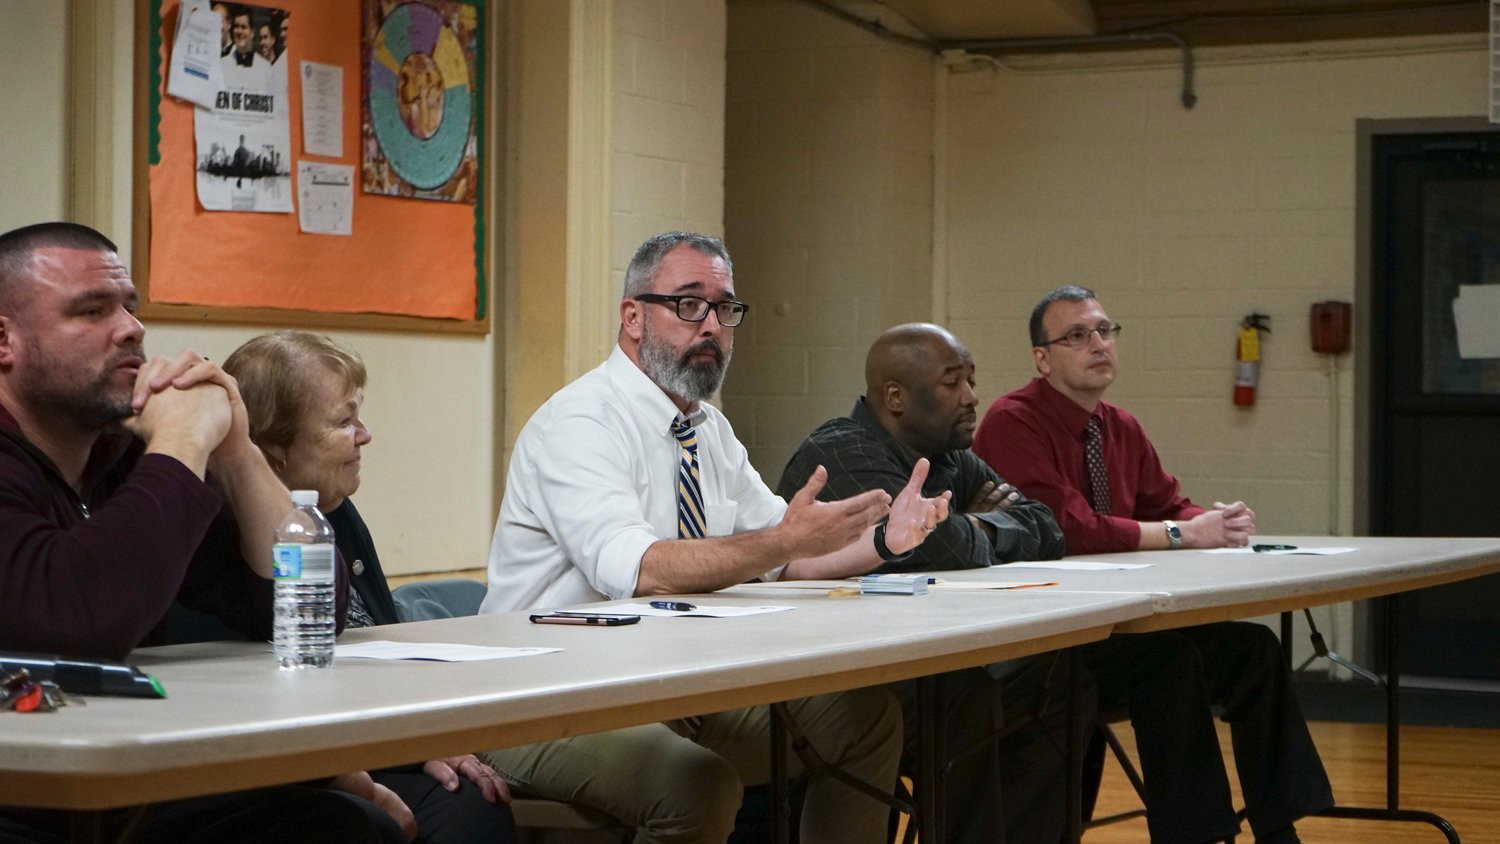 Joseph Trainor, center, executive director of the Martin De Porres Schools, addressed security concerns at a Nov. 6 meeting with Valley Stream residents.